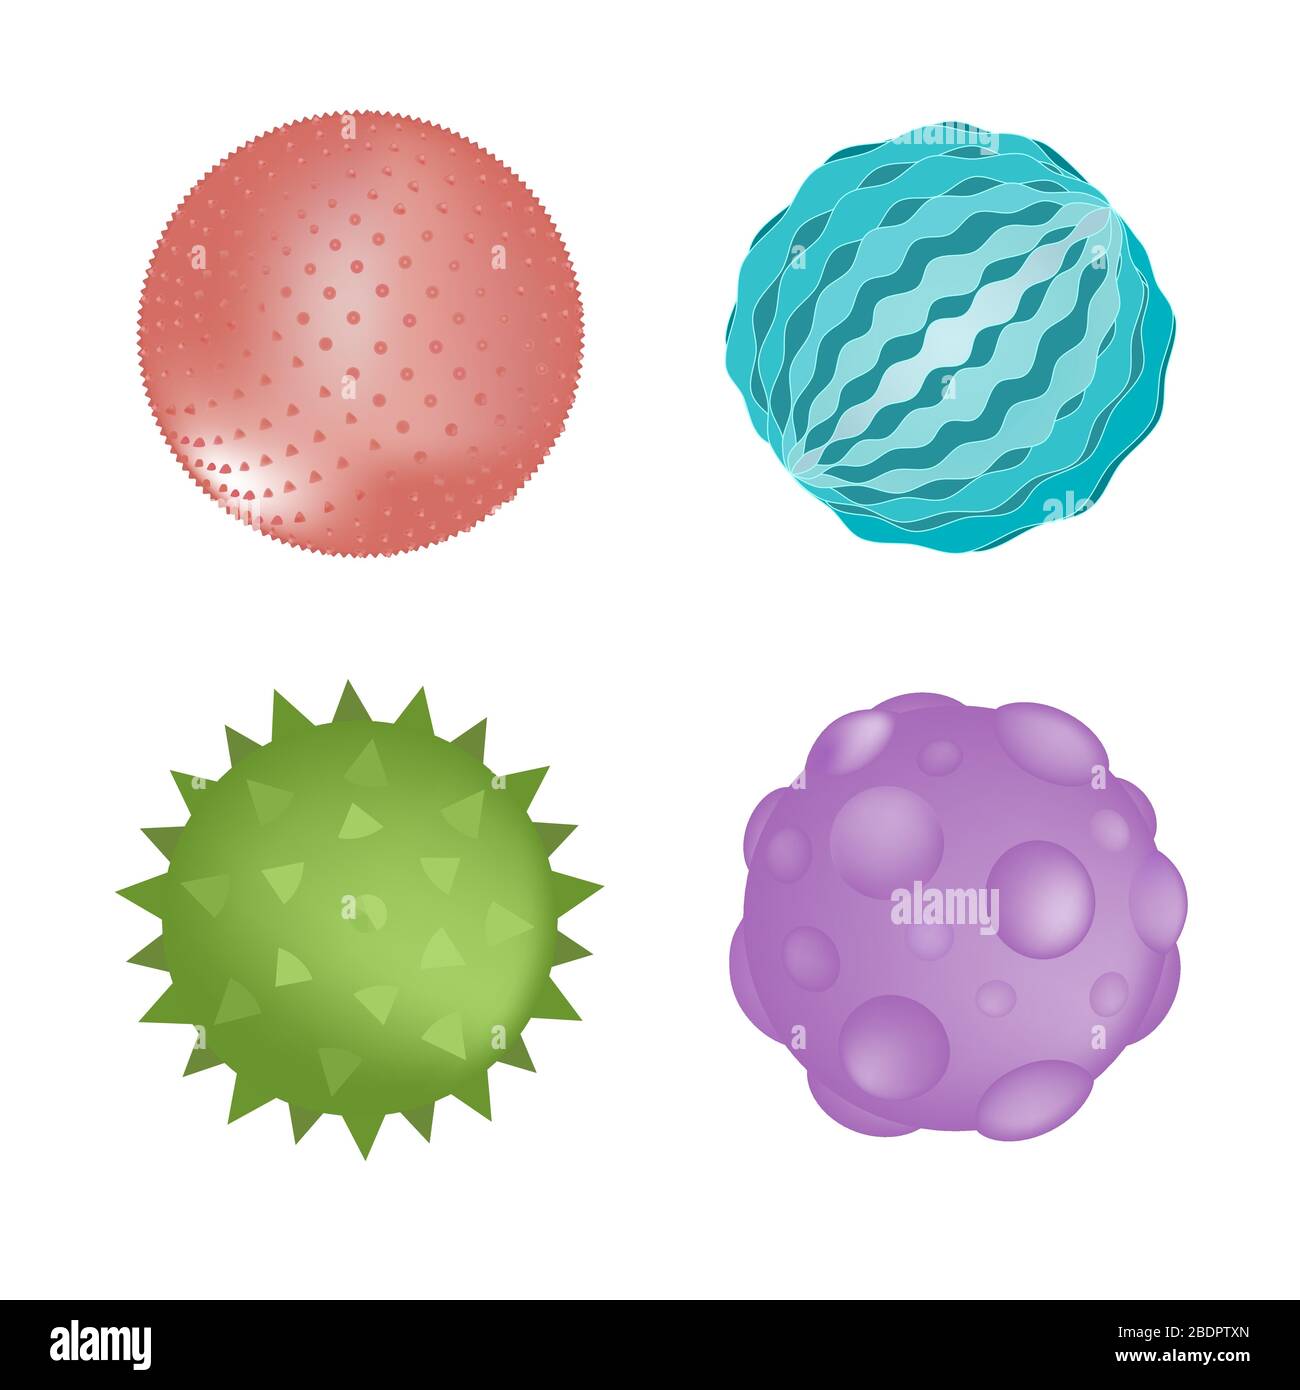 Sensory ball set of different colors and textures isolated on white. Vector illustration. Kids toys or sensory rooms equipment element Stock Vector